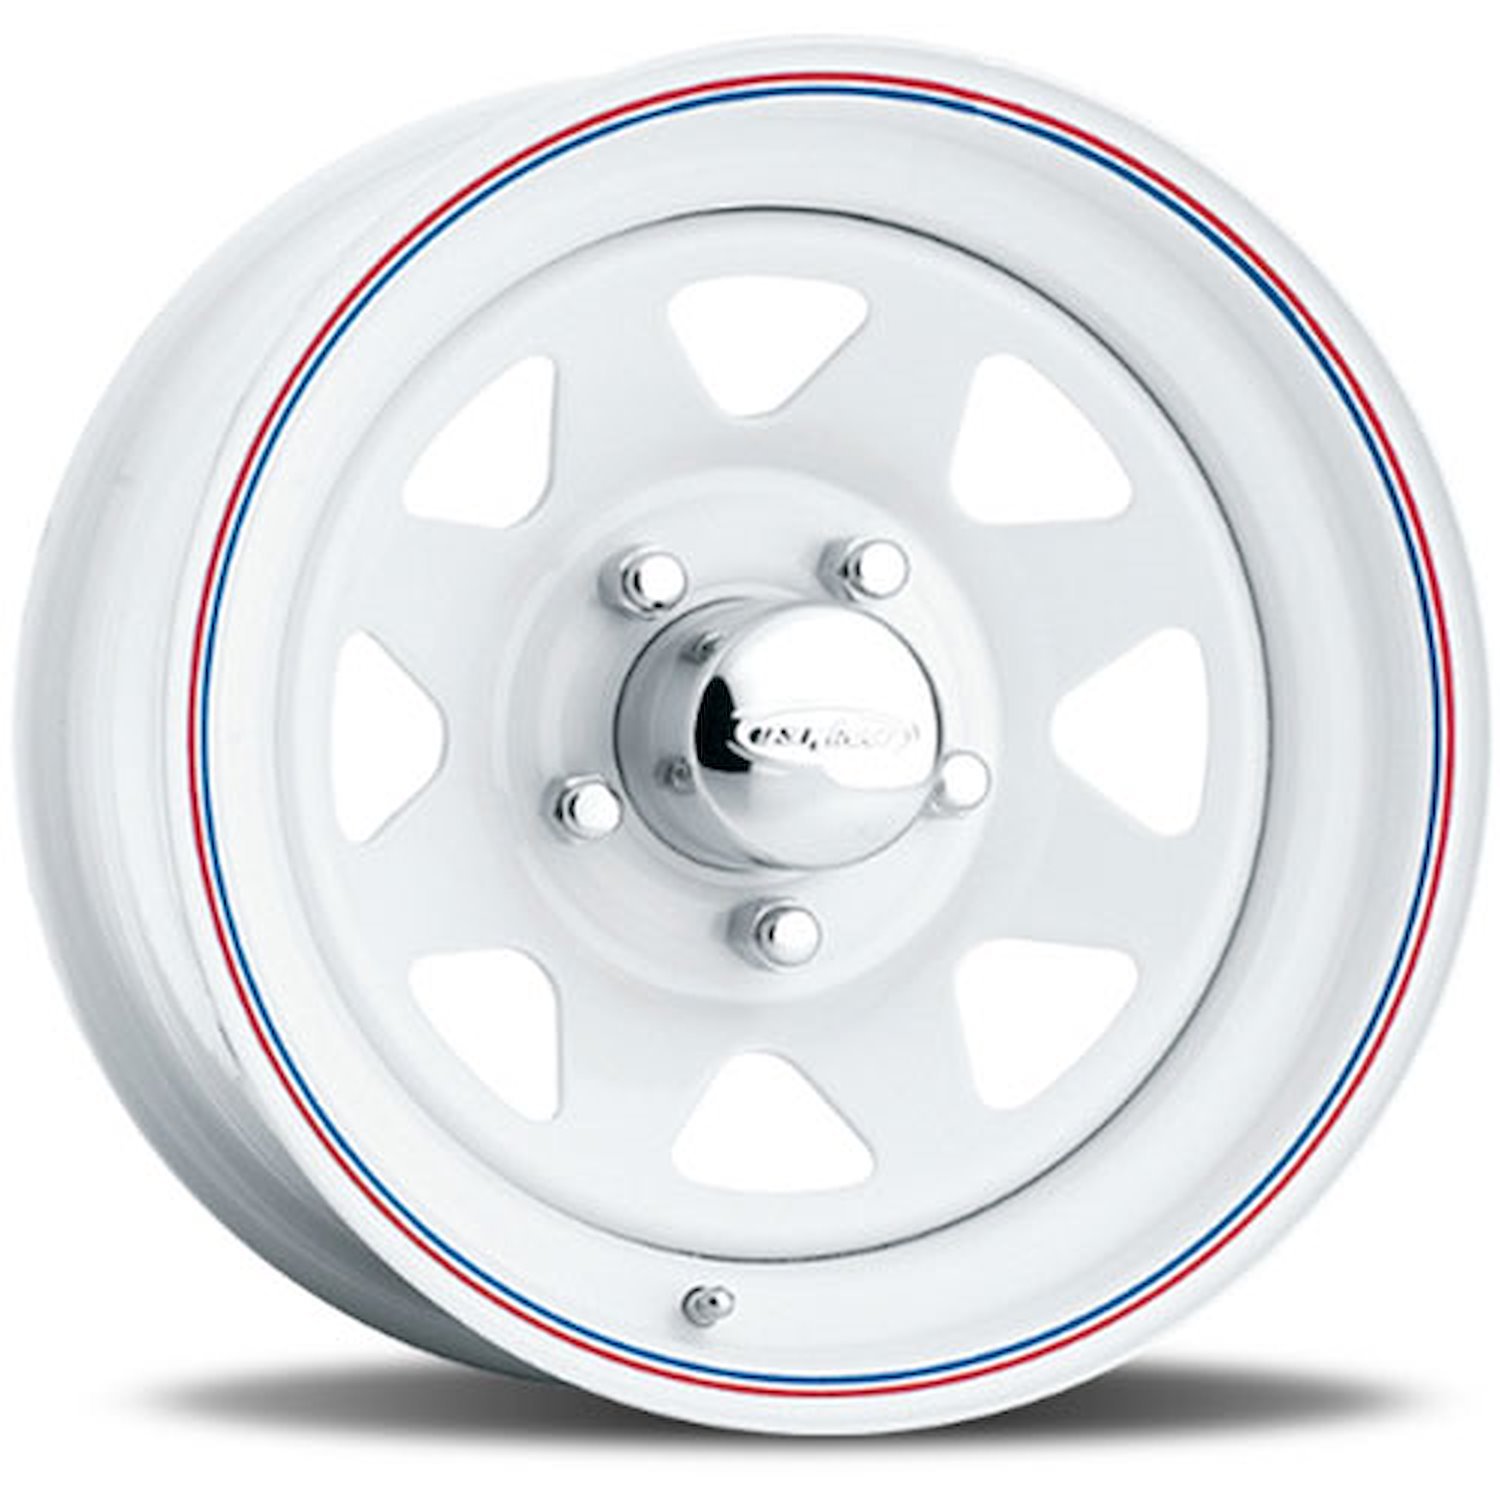 WHITE 8SPOKE 15 x 7 8 x 65 Bolt Circle 4 Back Spacing 0 offset 515 Center Bore 1600 lbs Load Rating